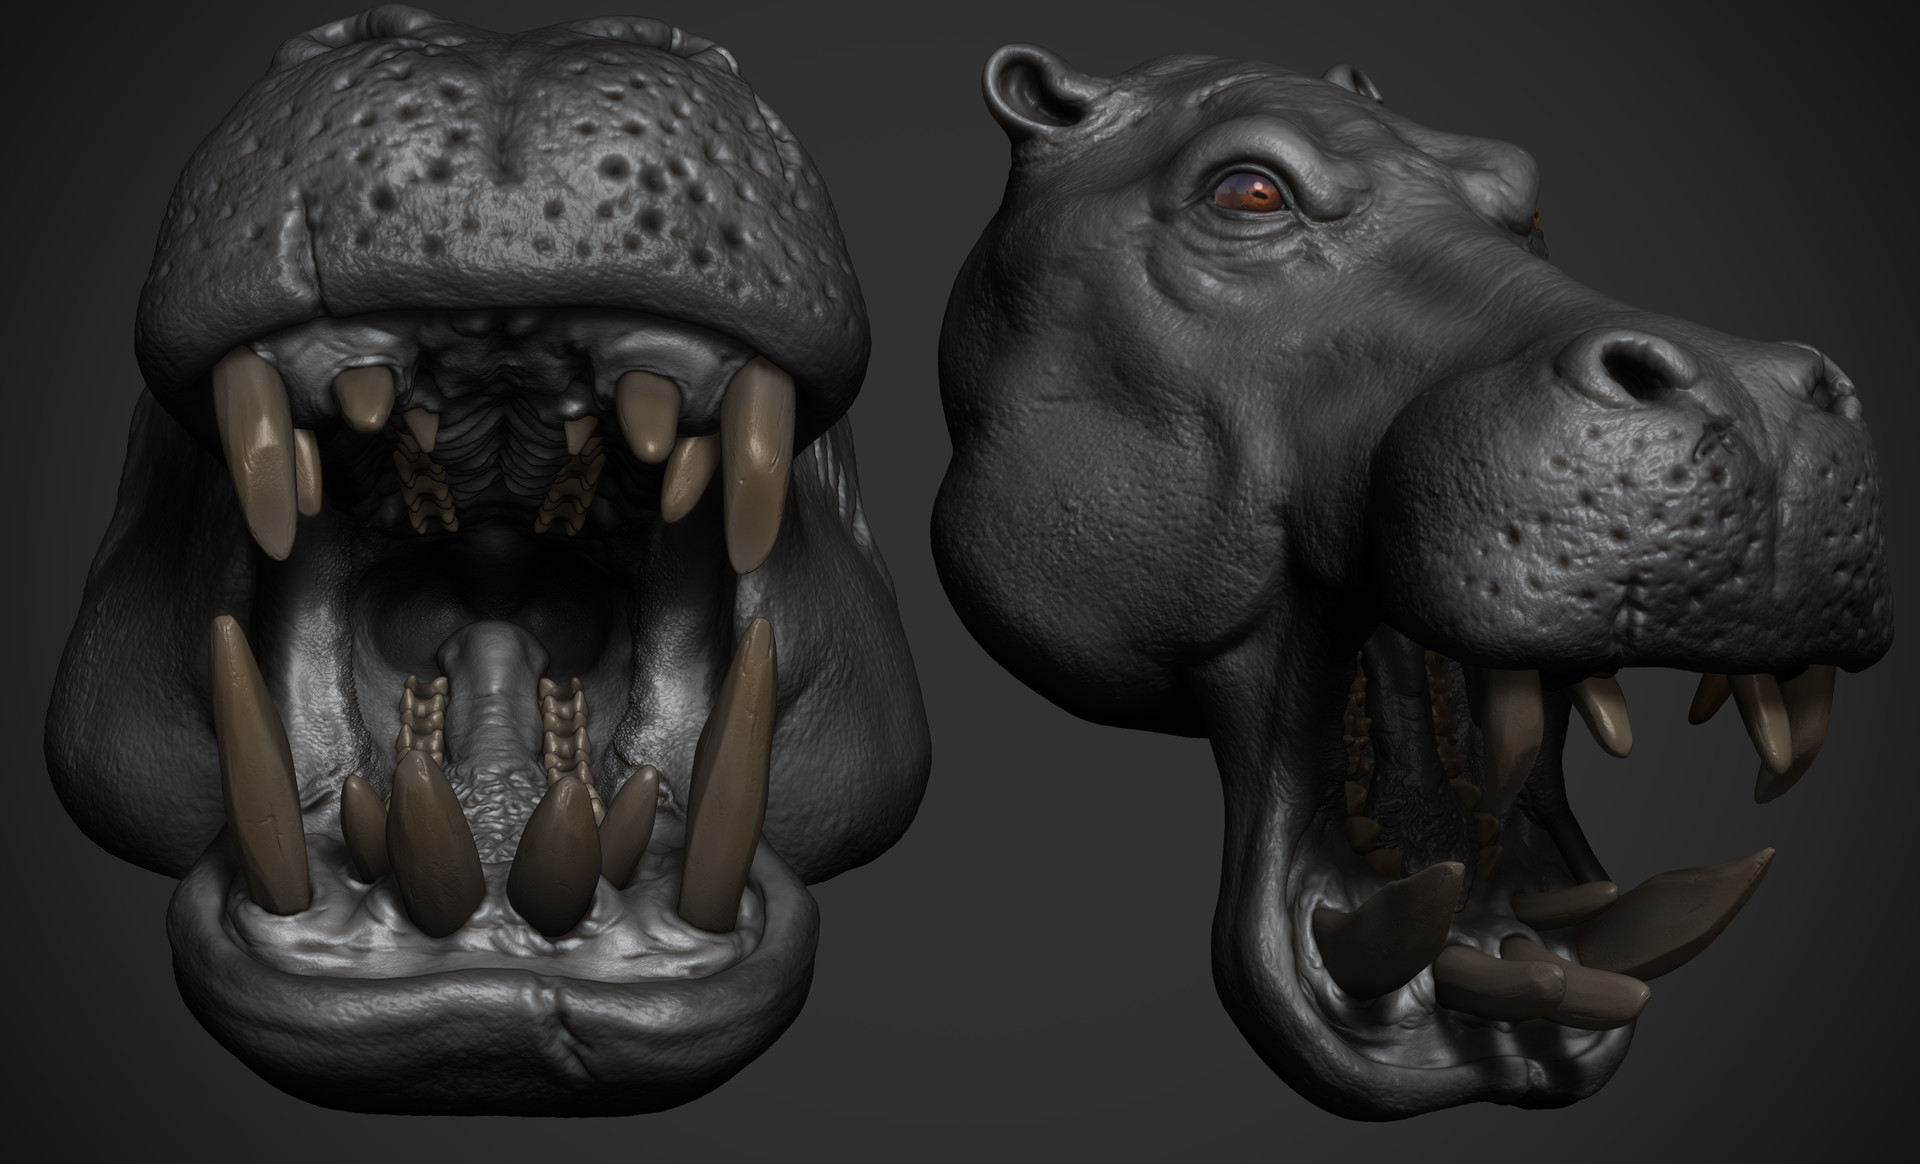 omar-chaouch-hippo-animal-warrior-omar-chaouch-wip-11.jpg